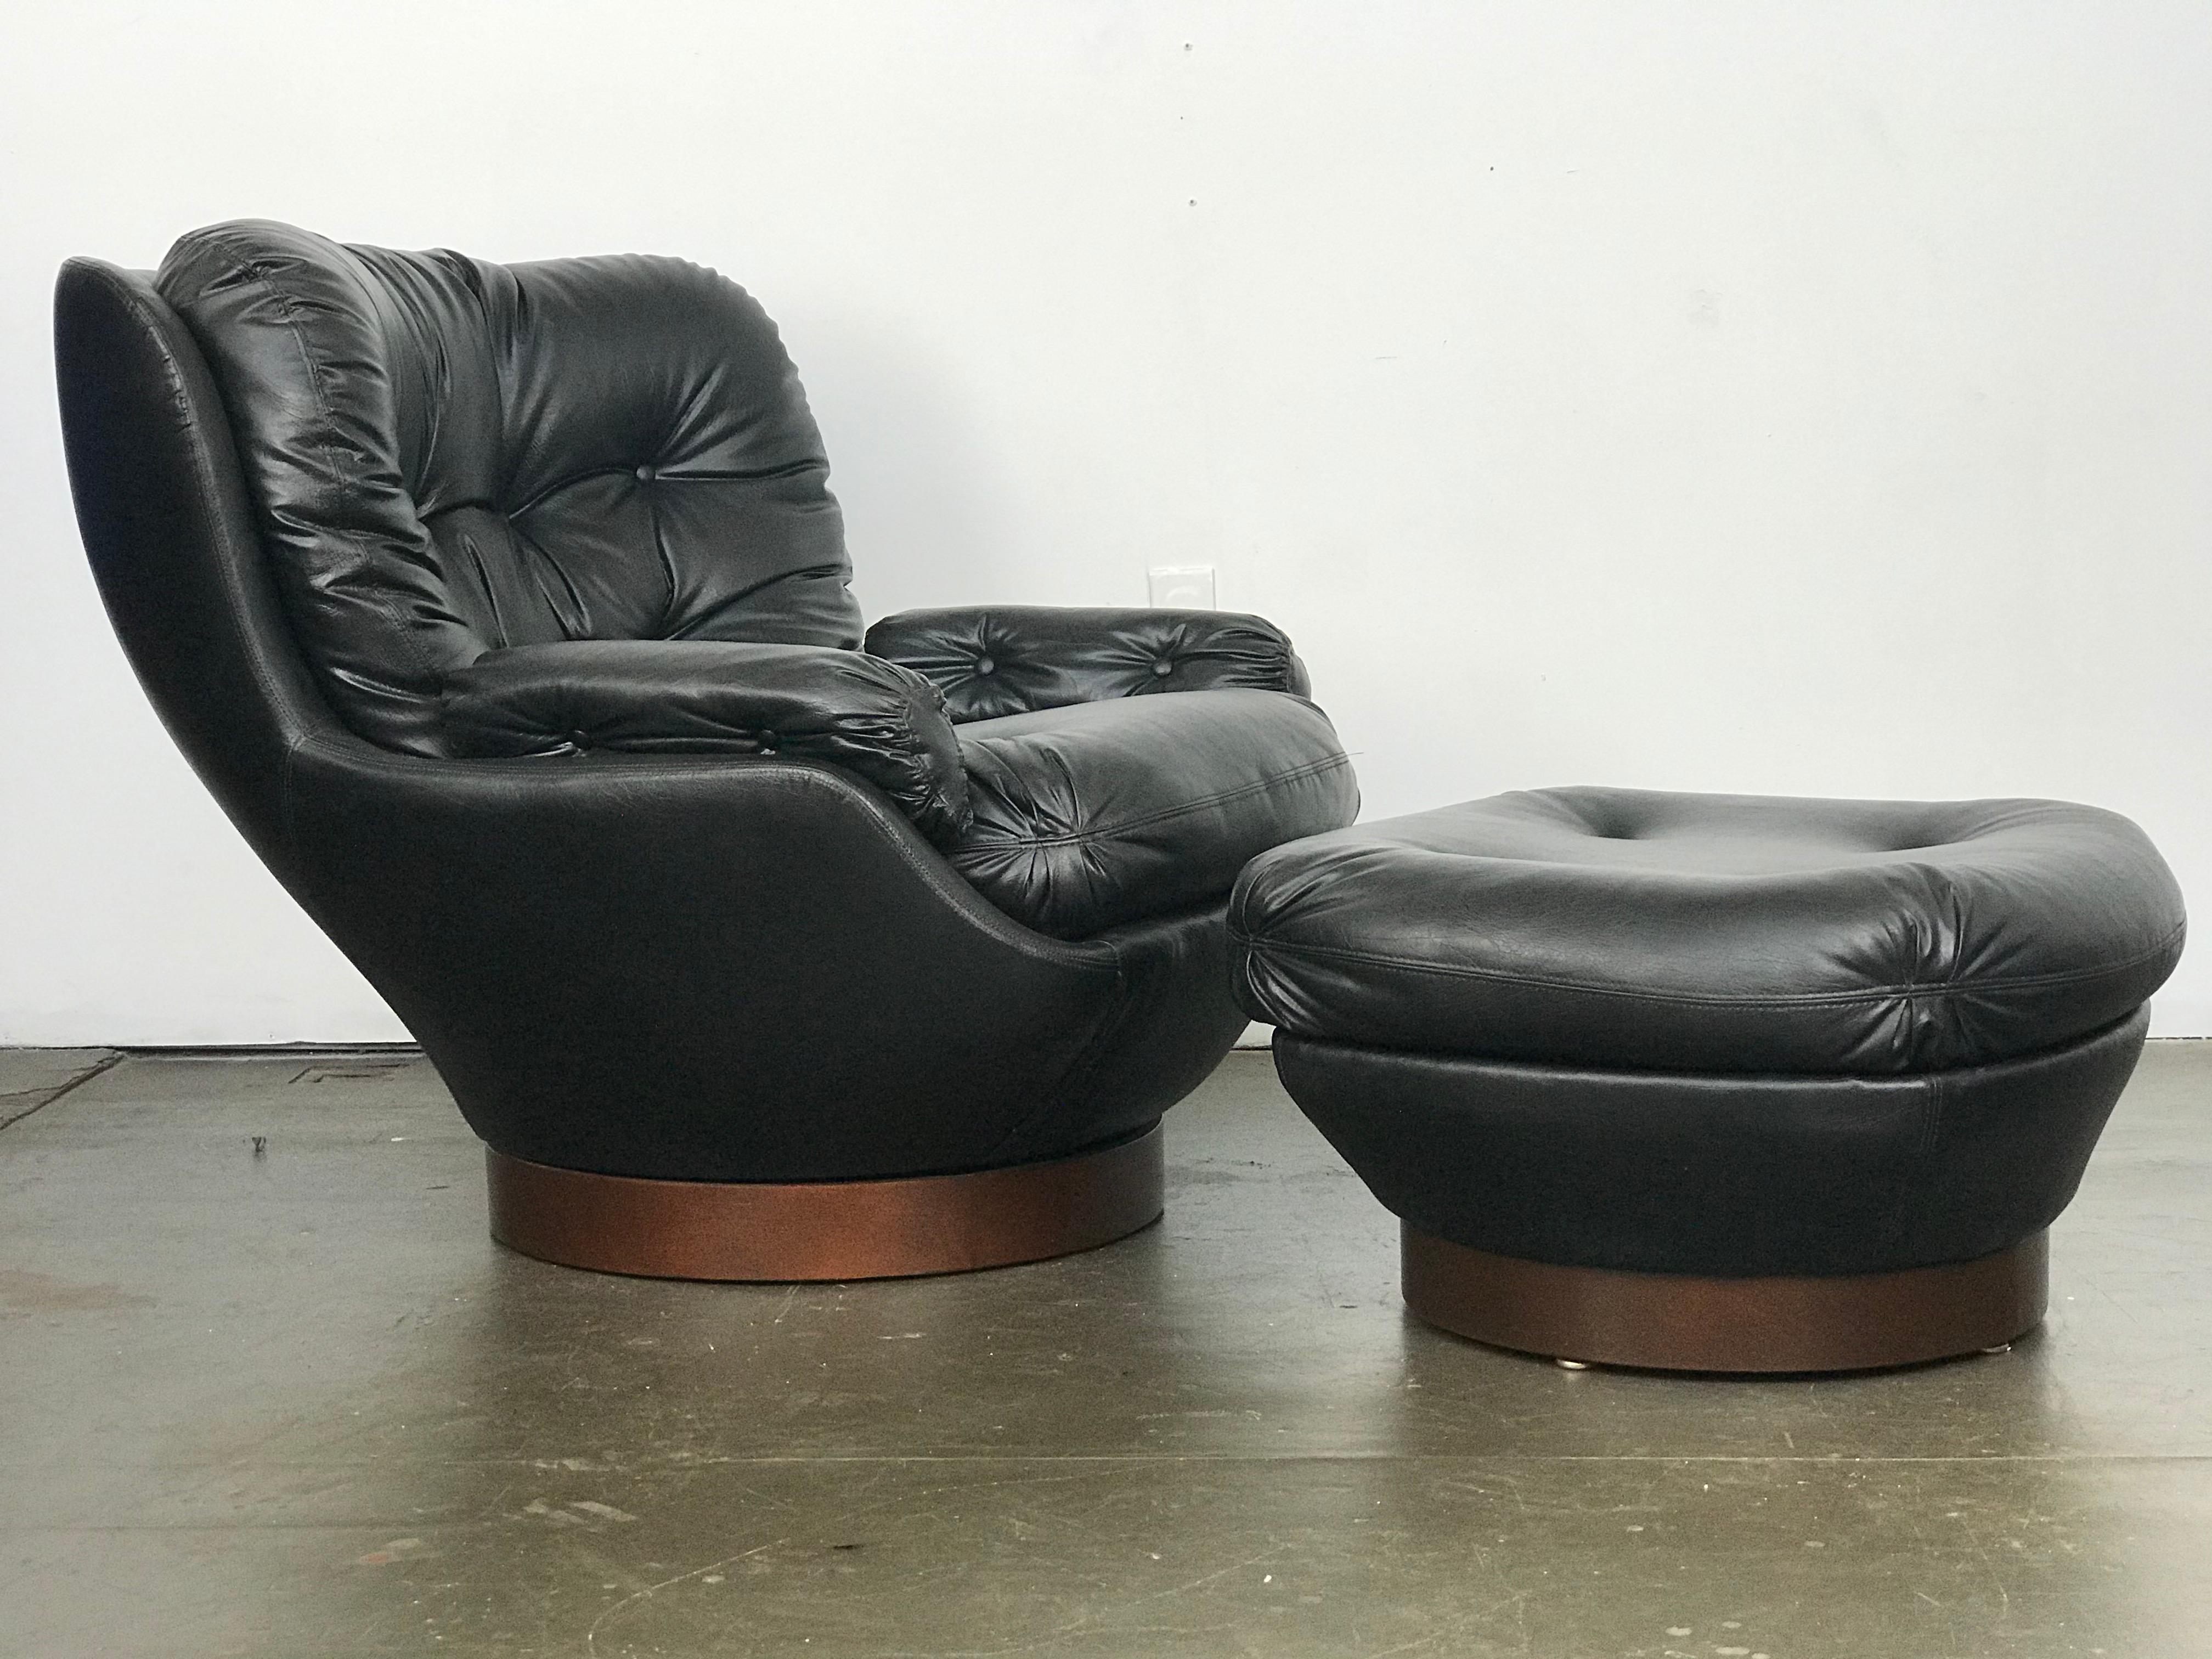 Excellent Mid-Century Modern swivel deep lounge chair and ottoman. I don't think this set was ever used - or it was used lightly. The original Naugahyde is in very nice shape - cushions are nice and comfortable. Walnut bases are clean. Chair swivels